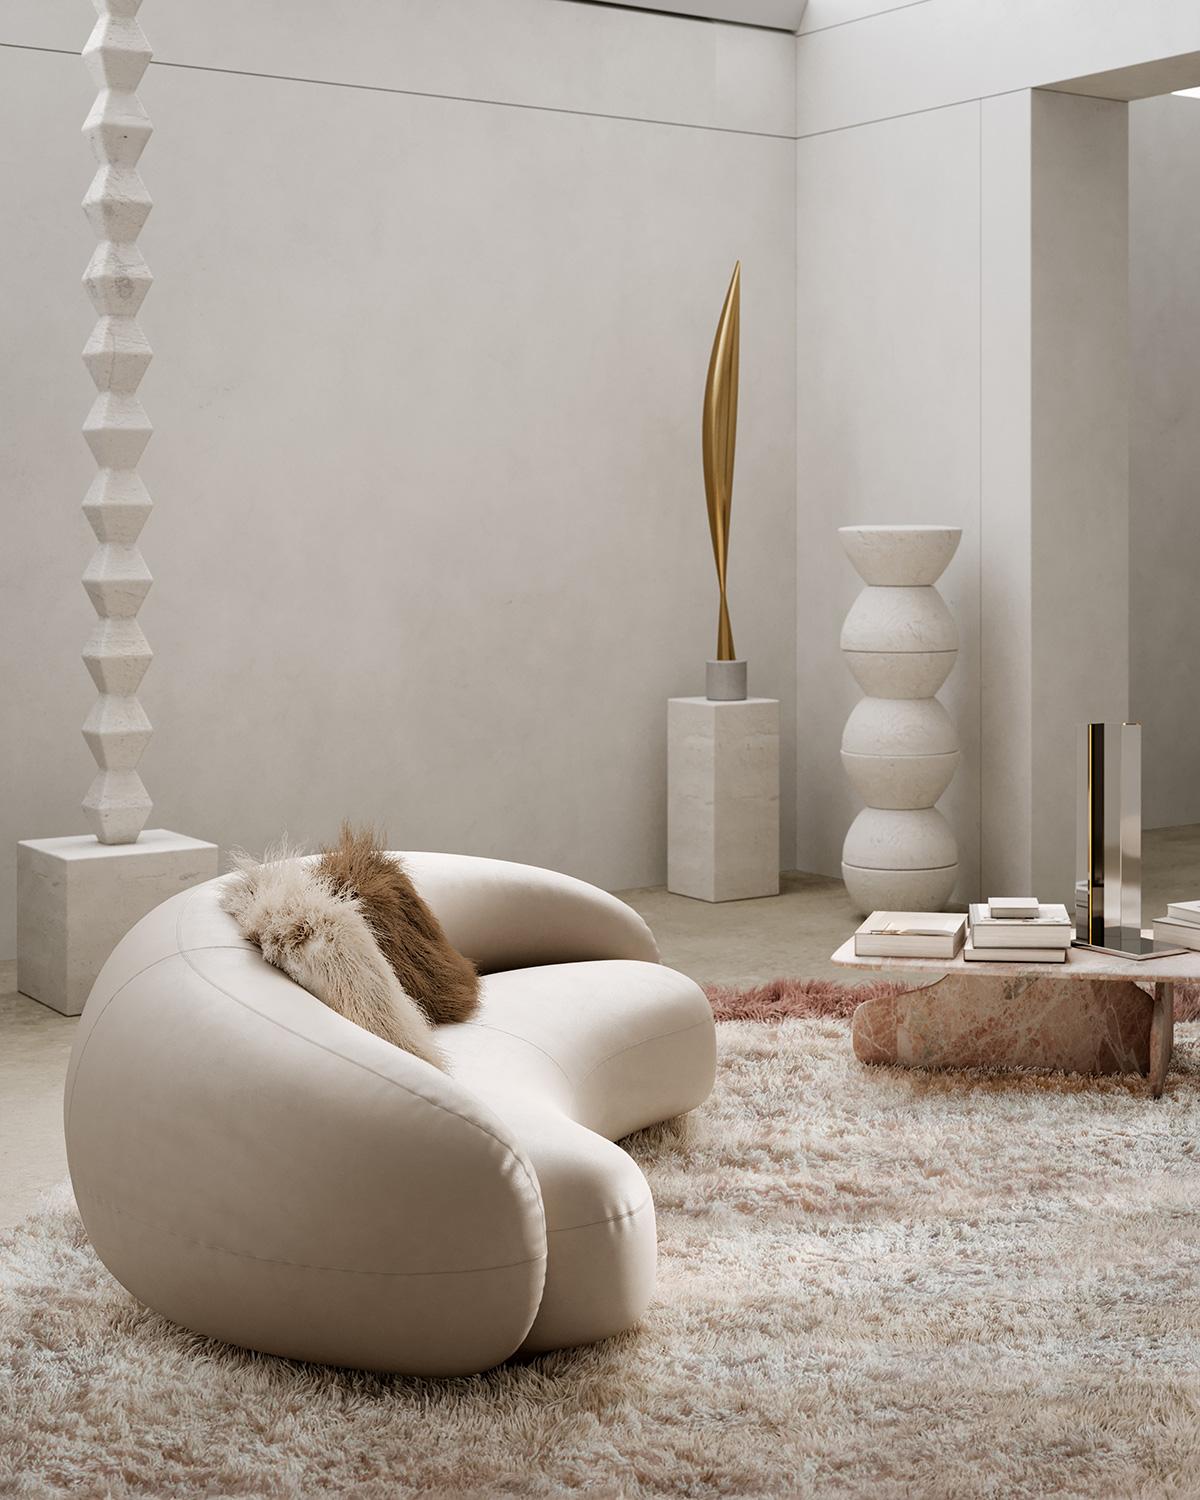 The iconic collection designed by Jonas Wagell meets leather.
With its soft and enveloping shapes, Julep has won the hearts of those who experience it every day. This family of upholstered furniture is linked to full and generous lines, which